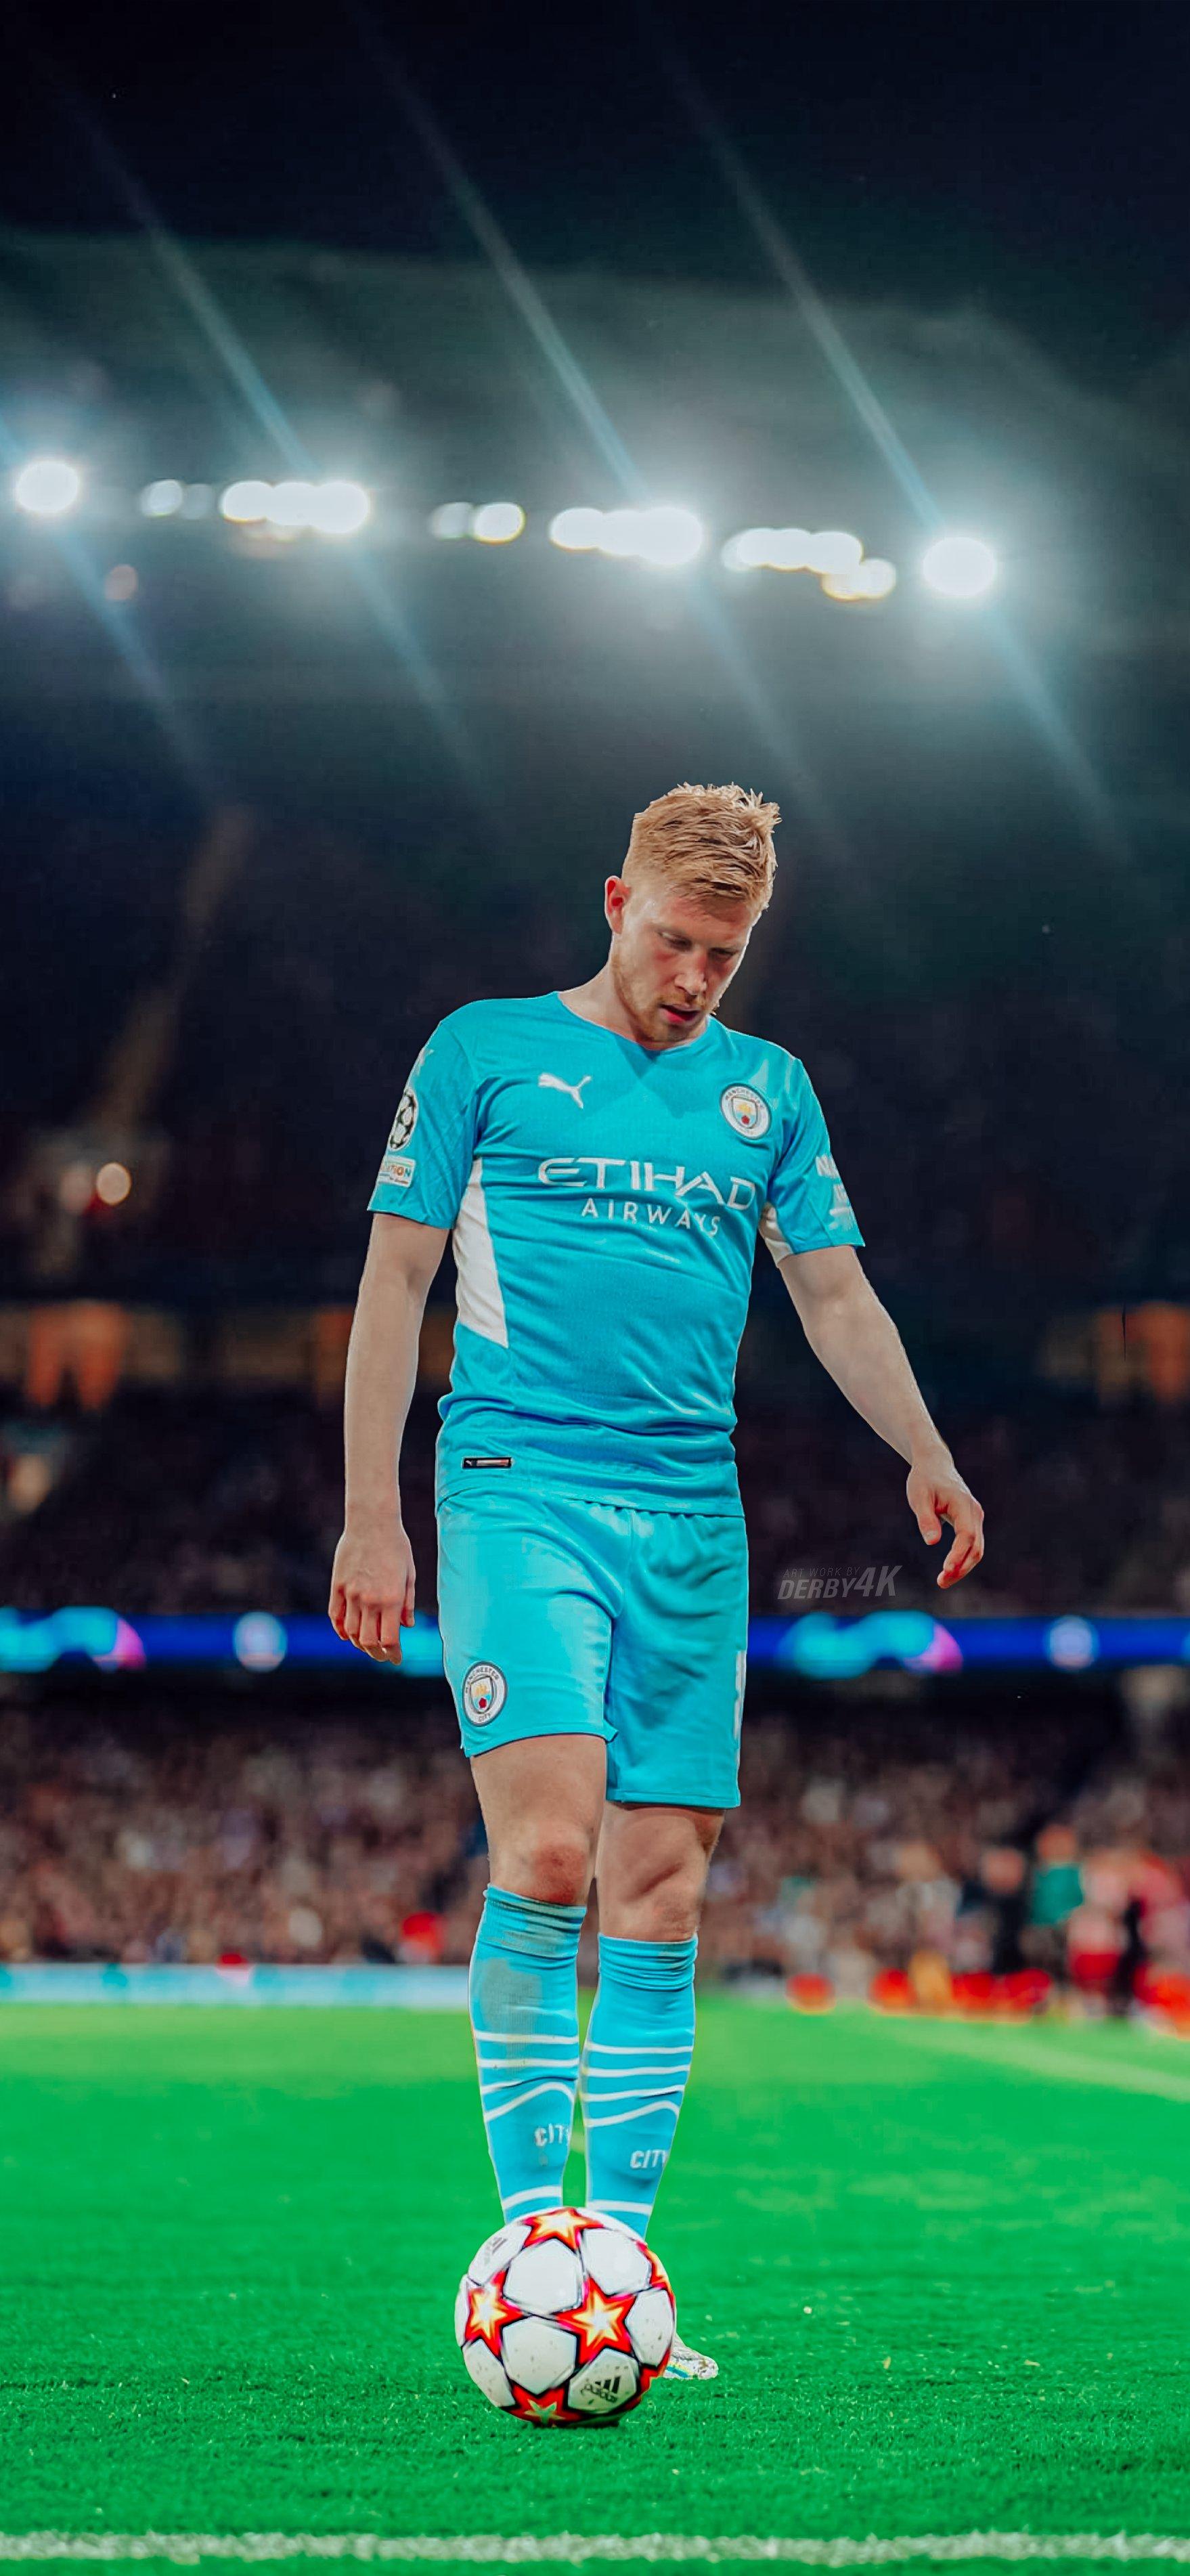 Kevin De Bruyne iPhone Background 1758x3806